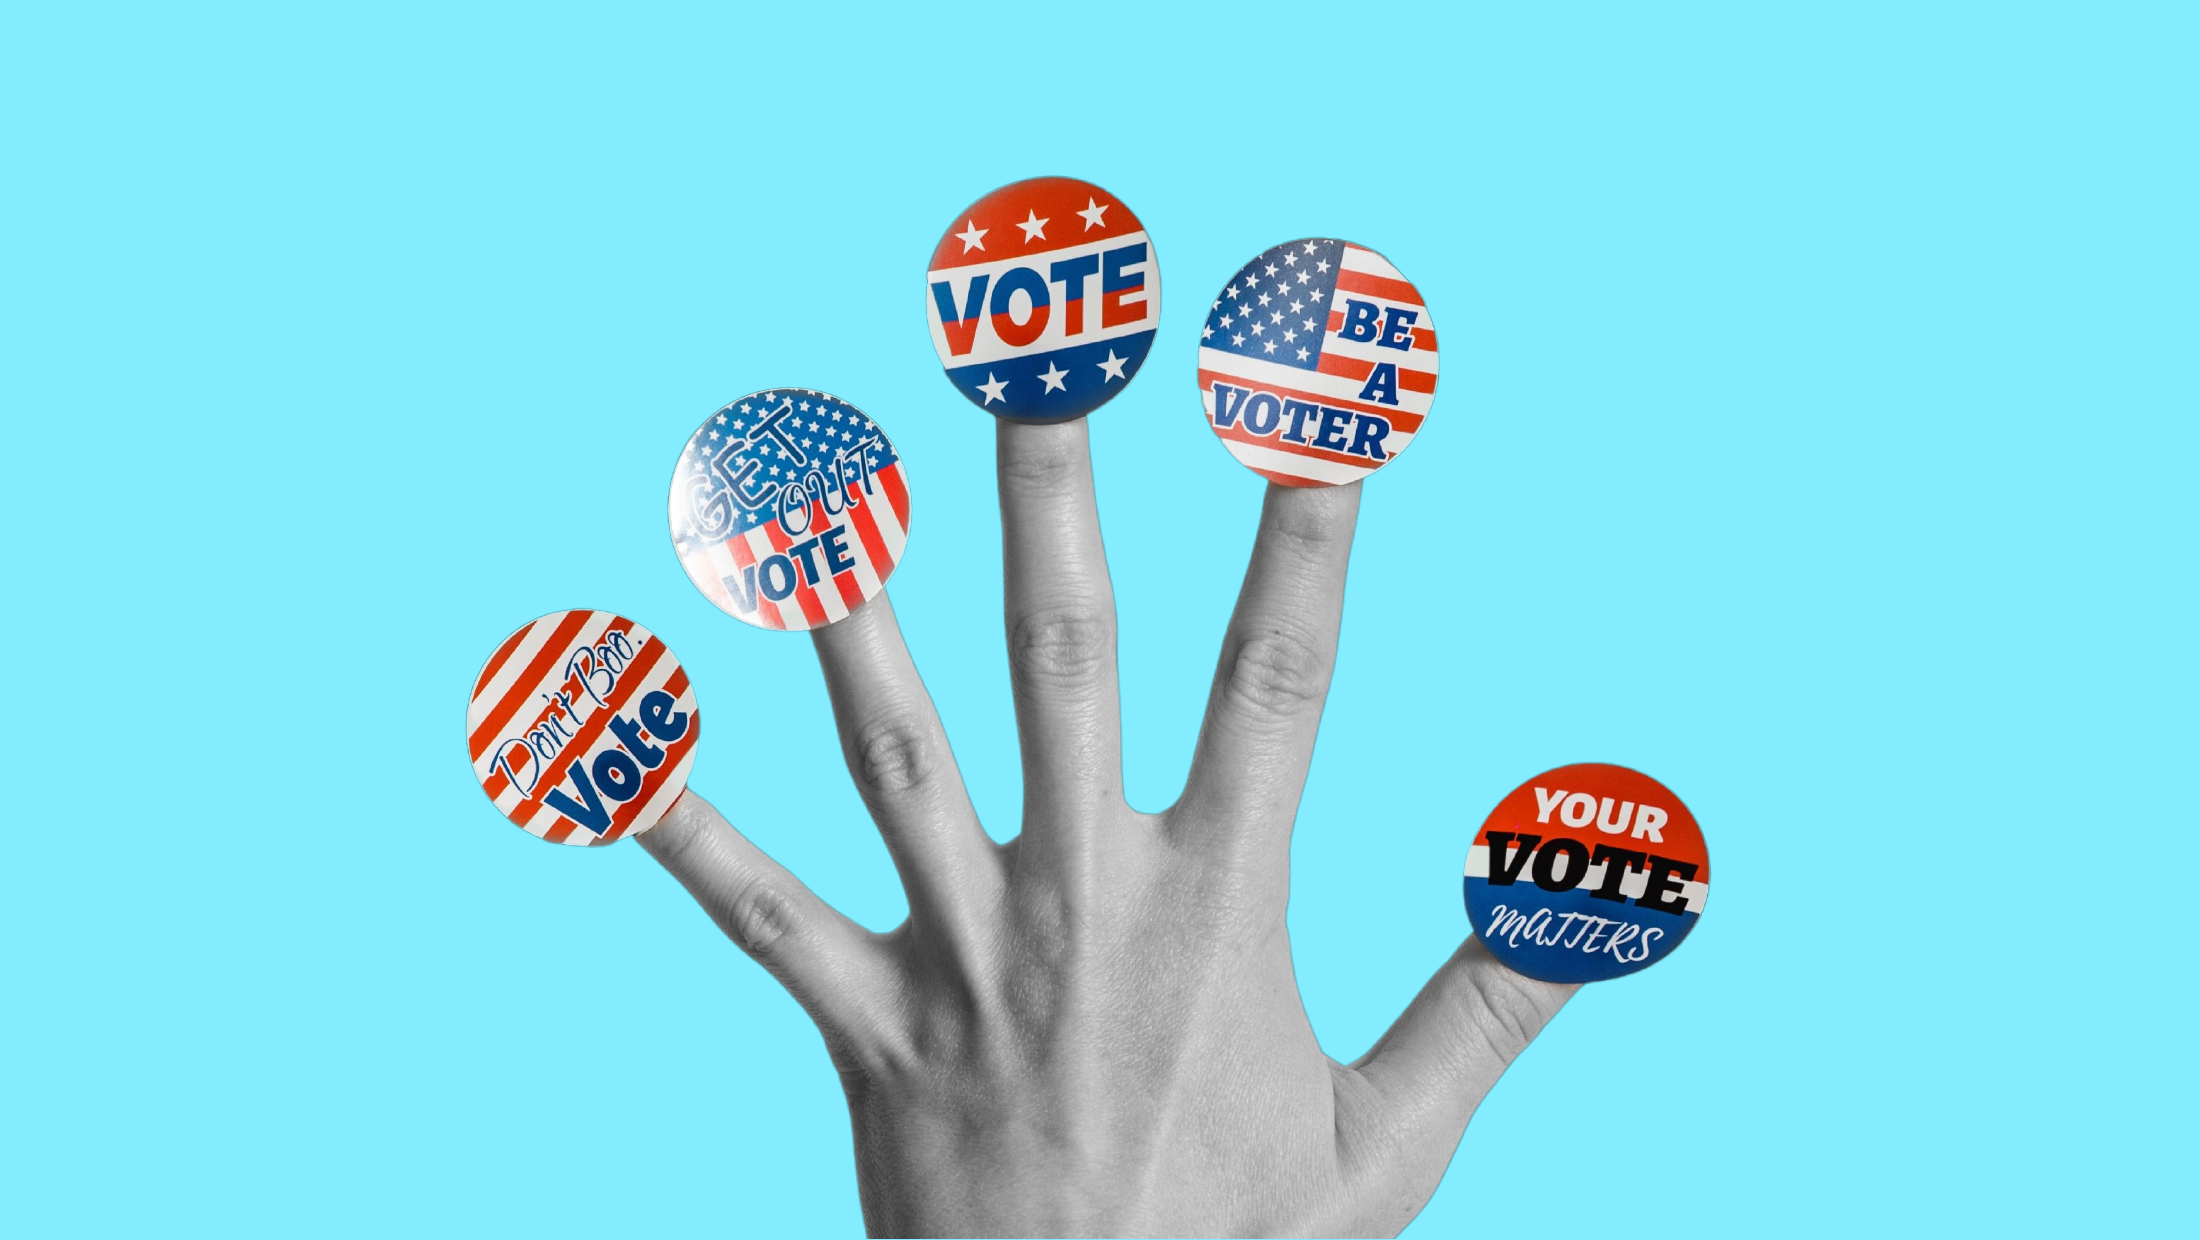 A hand with five different voting stickers stuck to its finger tips with sayings like "Don't Boo, Vote", "Get Out, Vote", "Vote", "Be A Voter", and "Your Vote Matters"